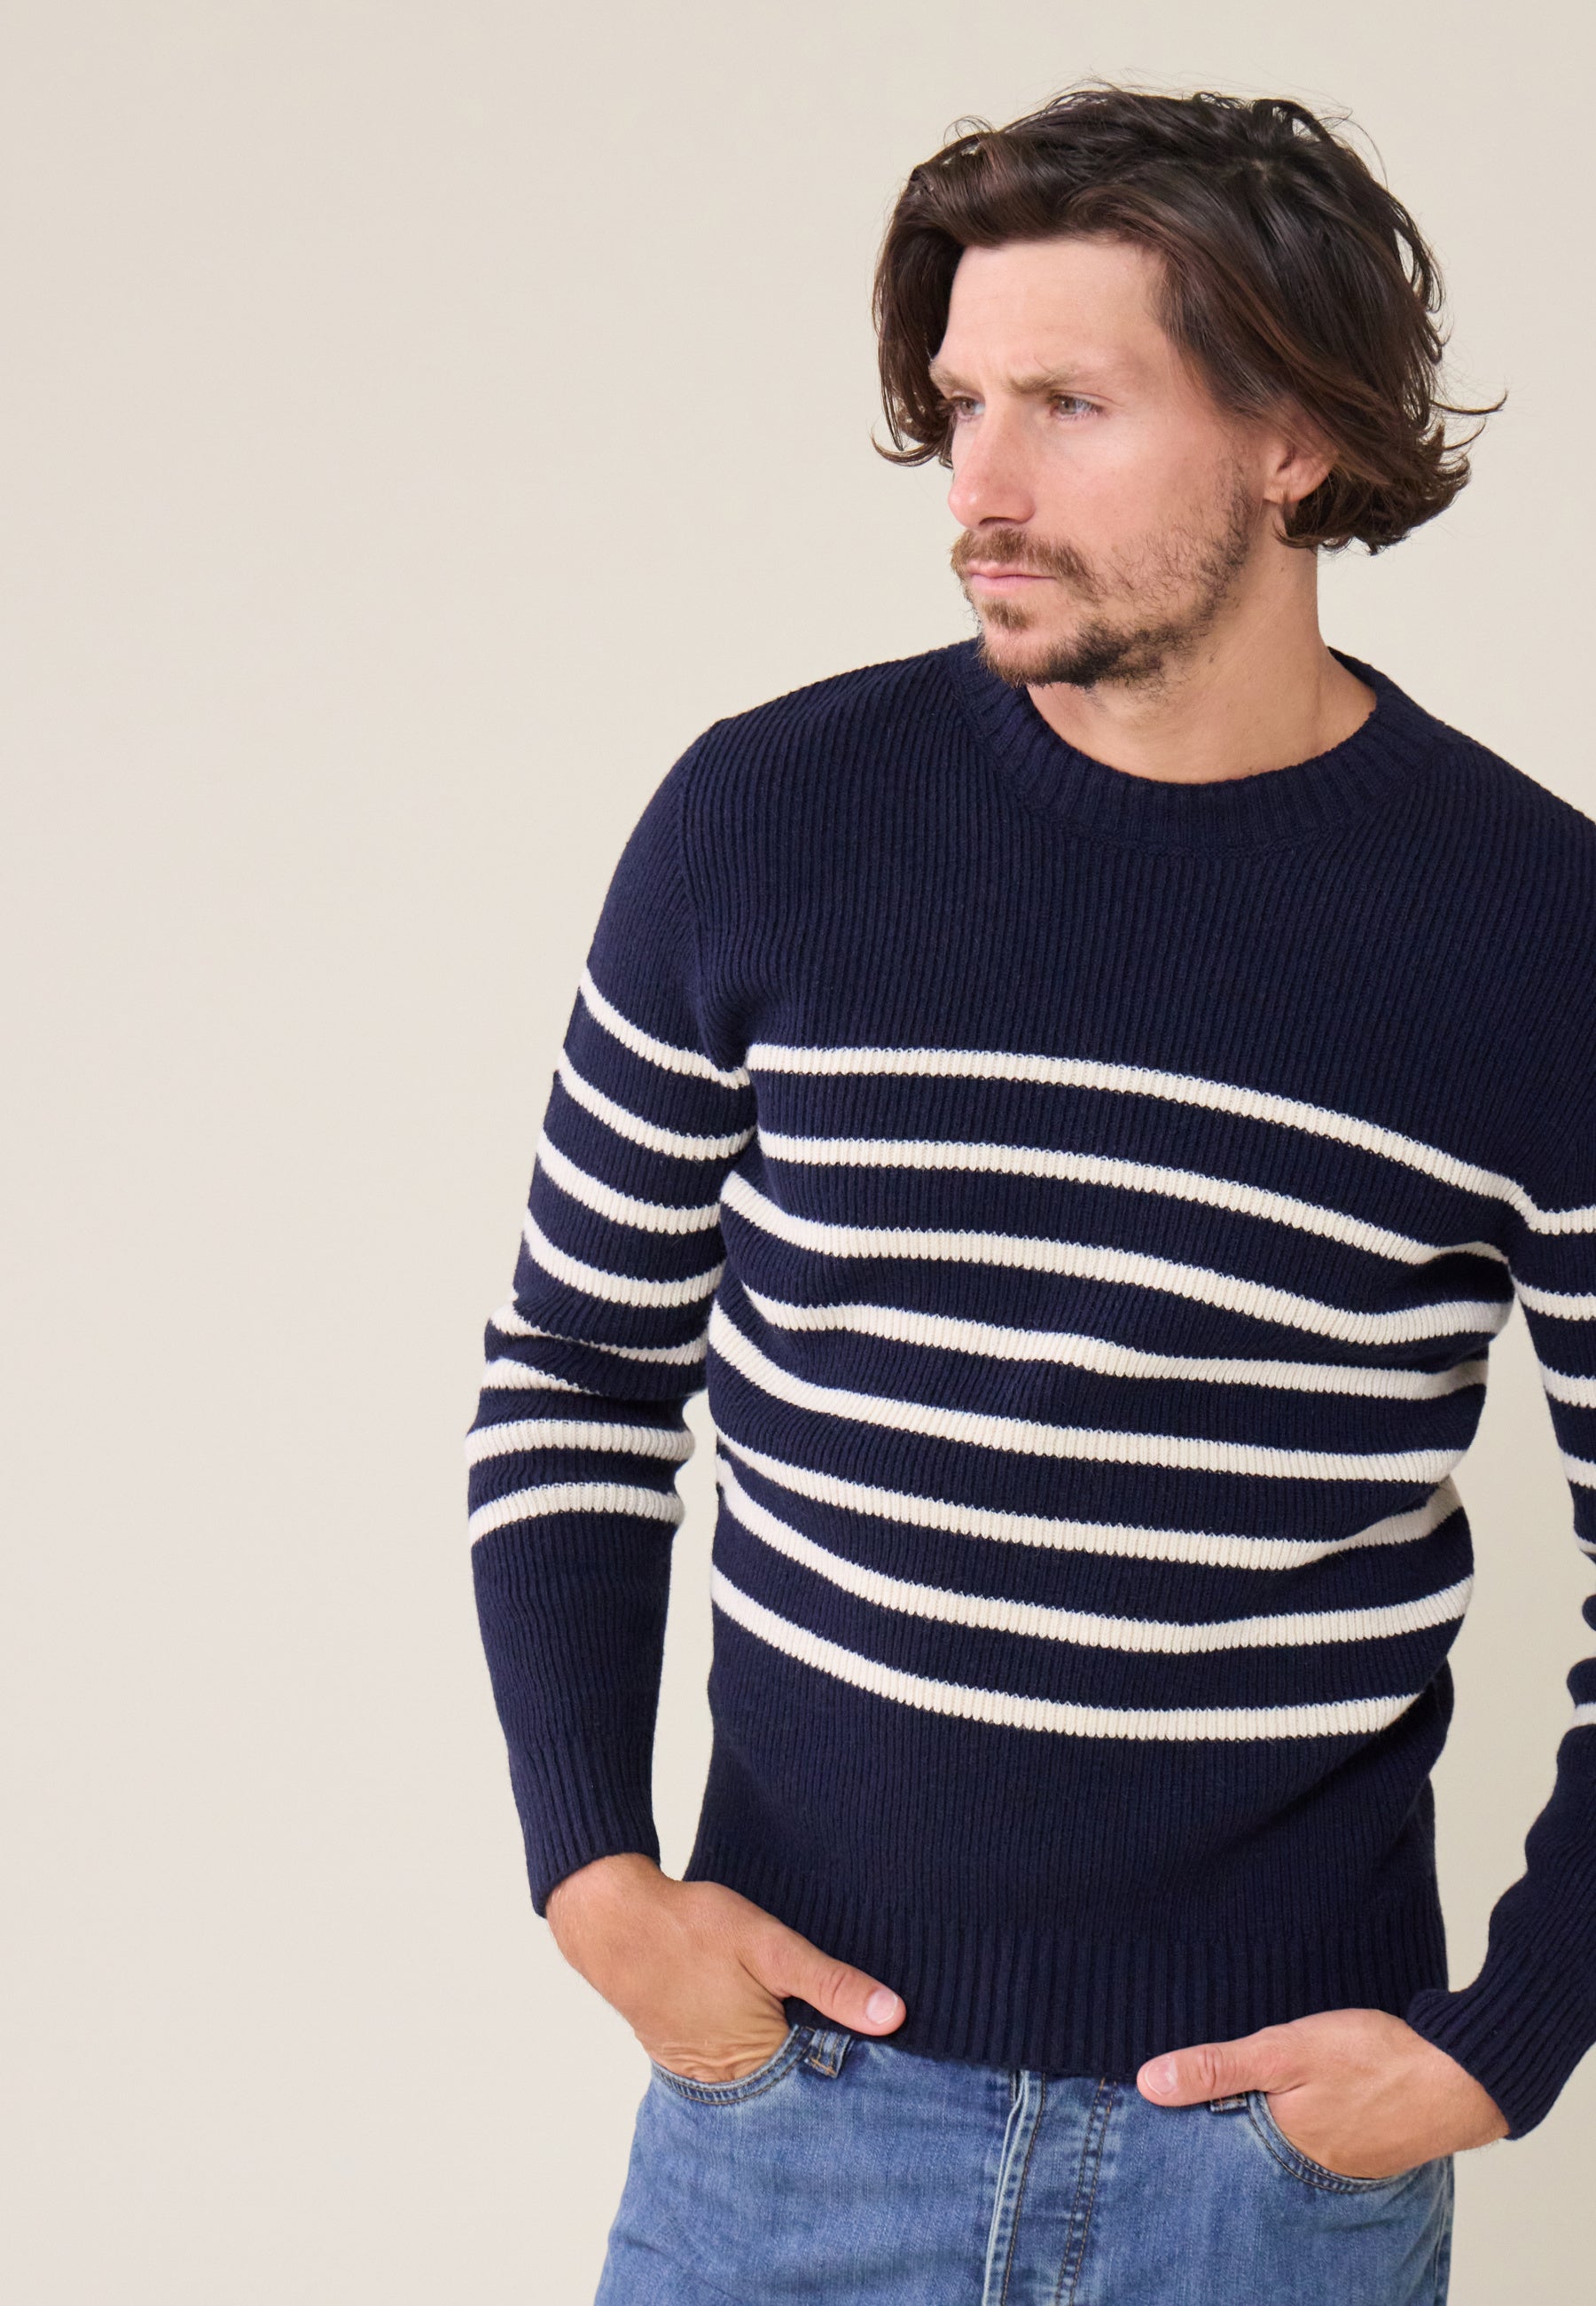 Tous les Pulls Homme Made in France